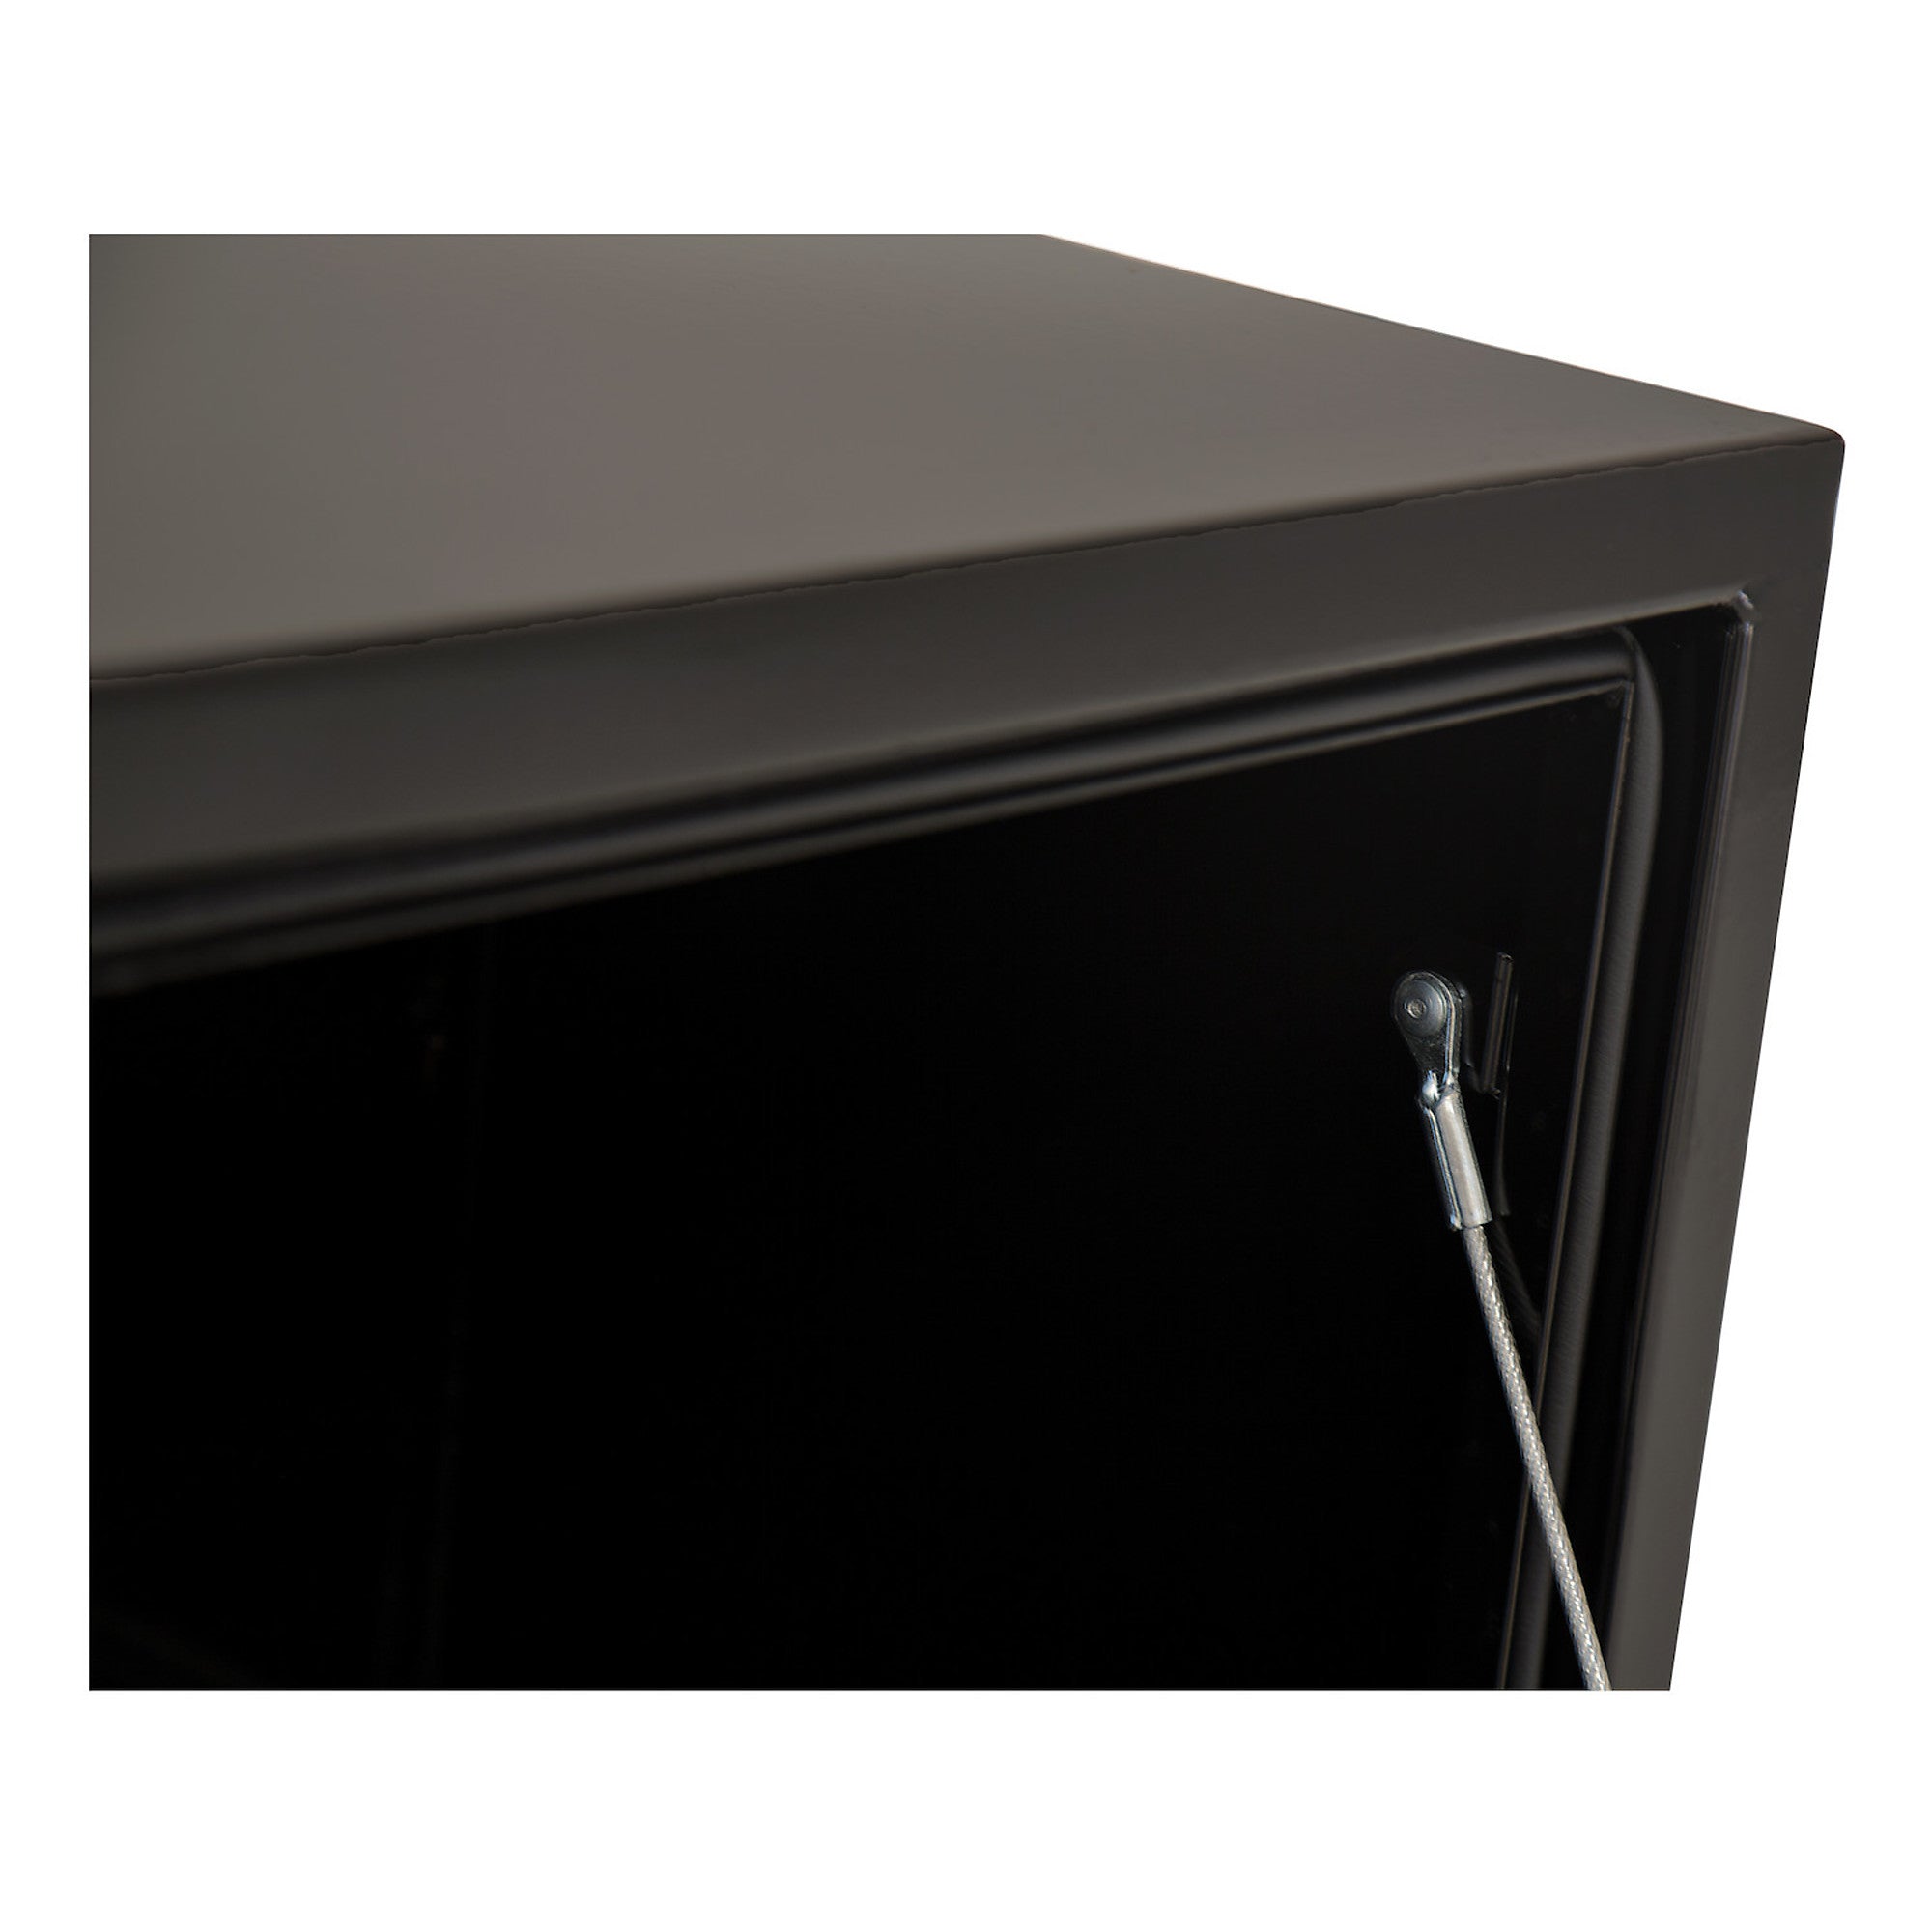 Underbody Truck Box, Width 48 in, Material Carbon Steel, Color Finish Glossy Black - $240